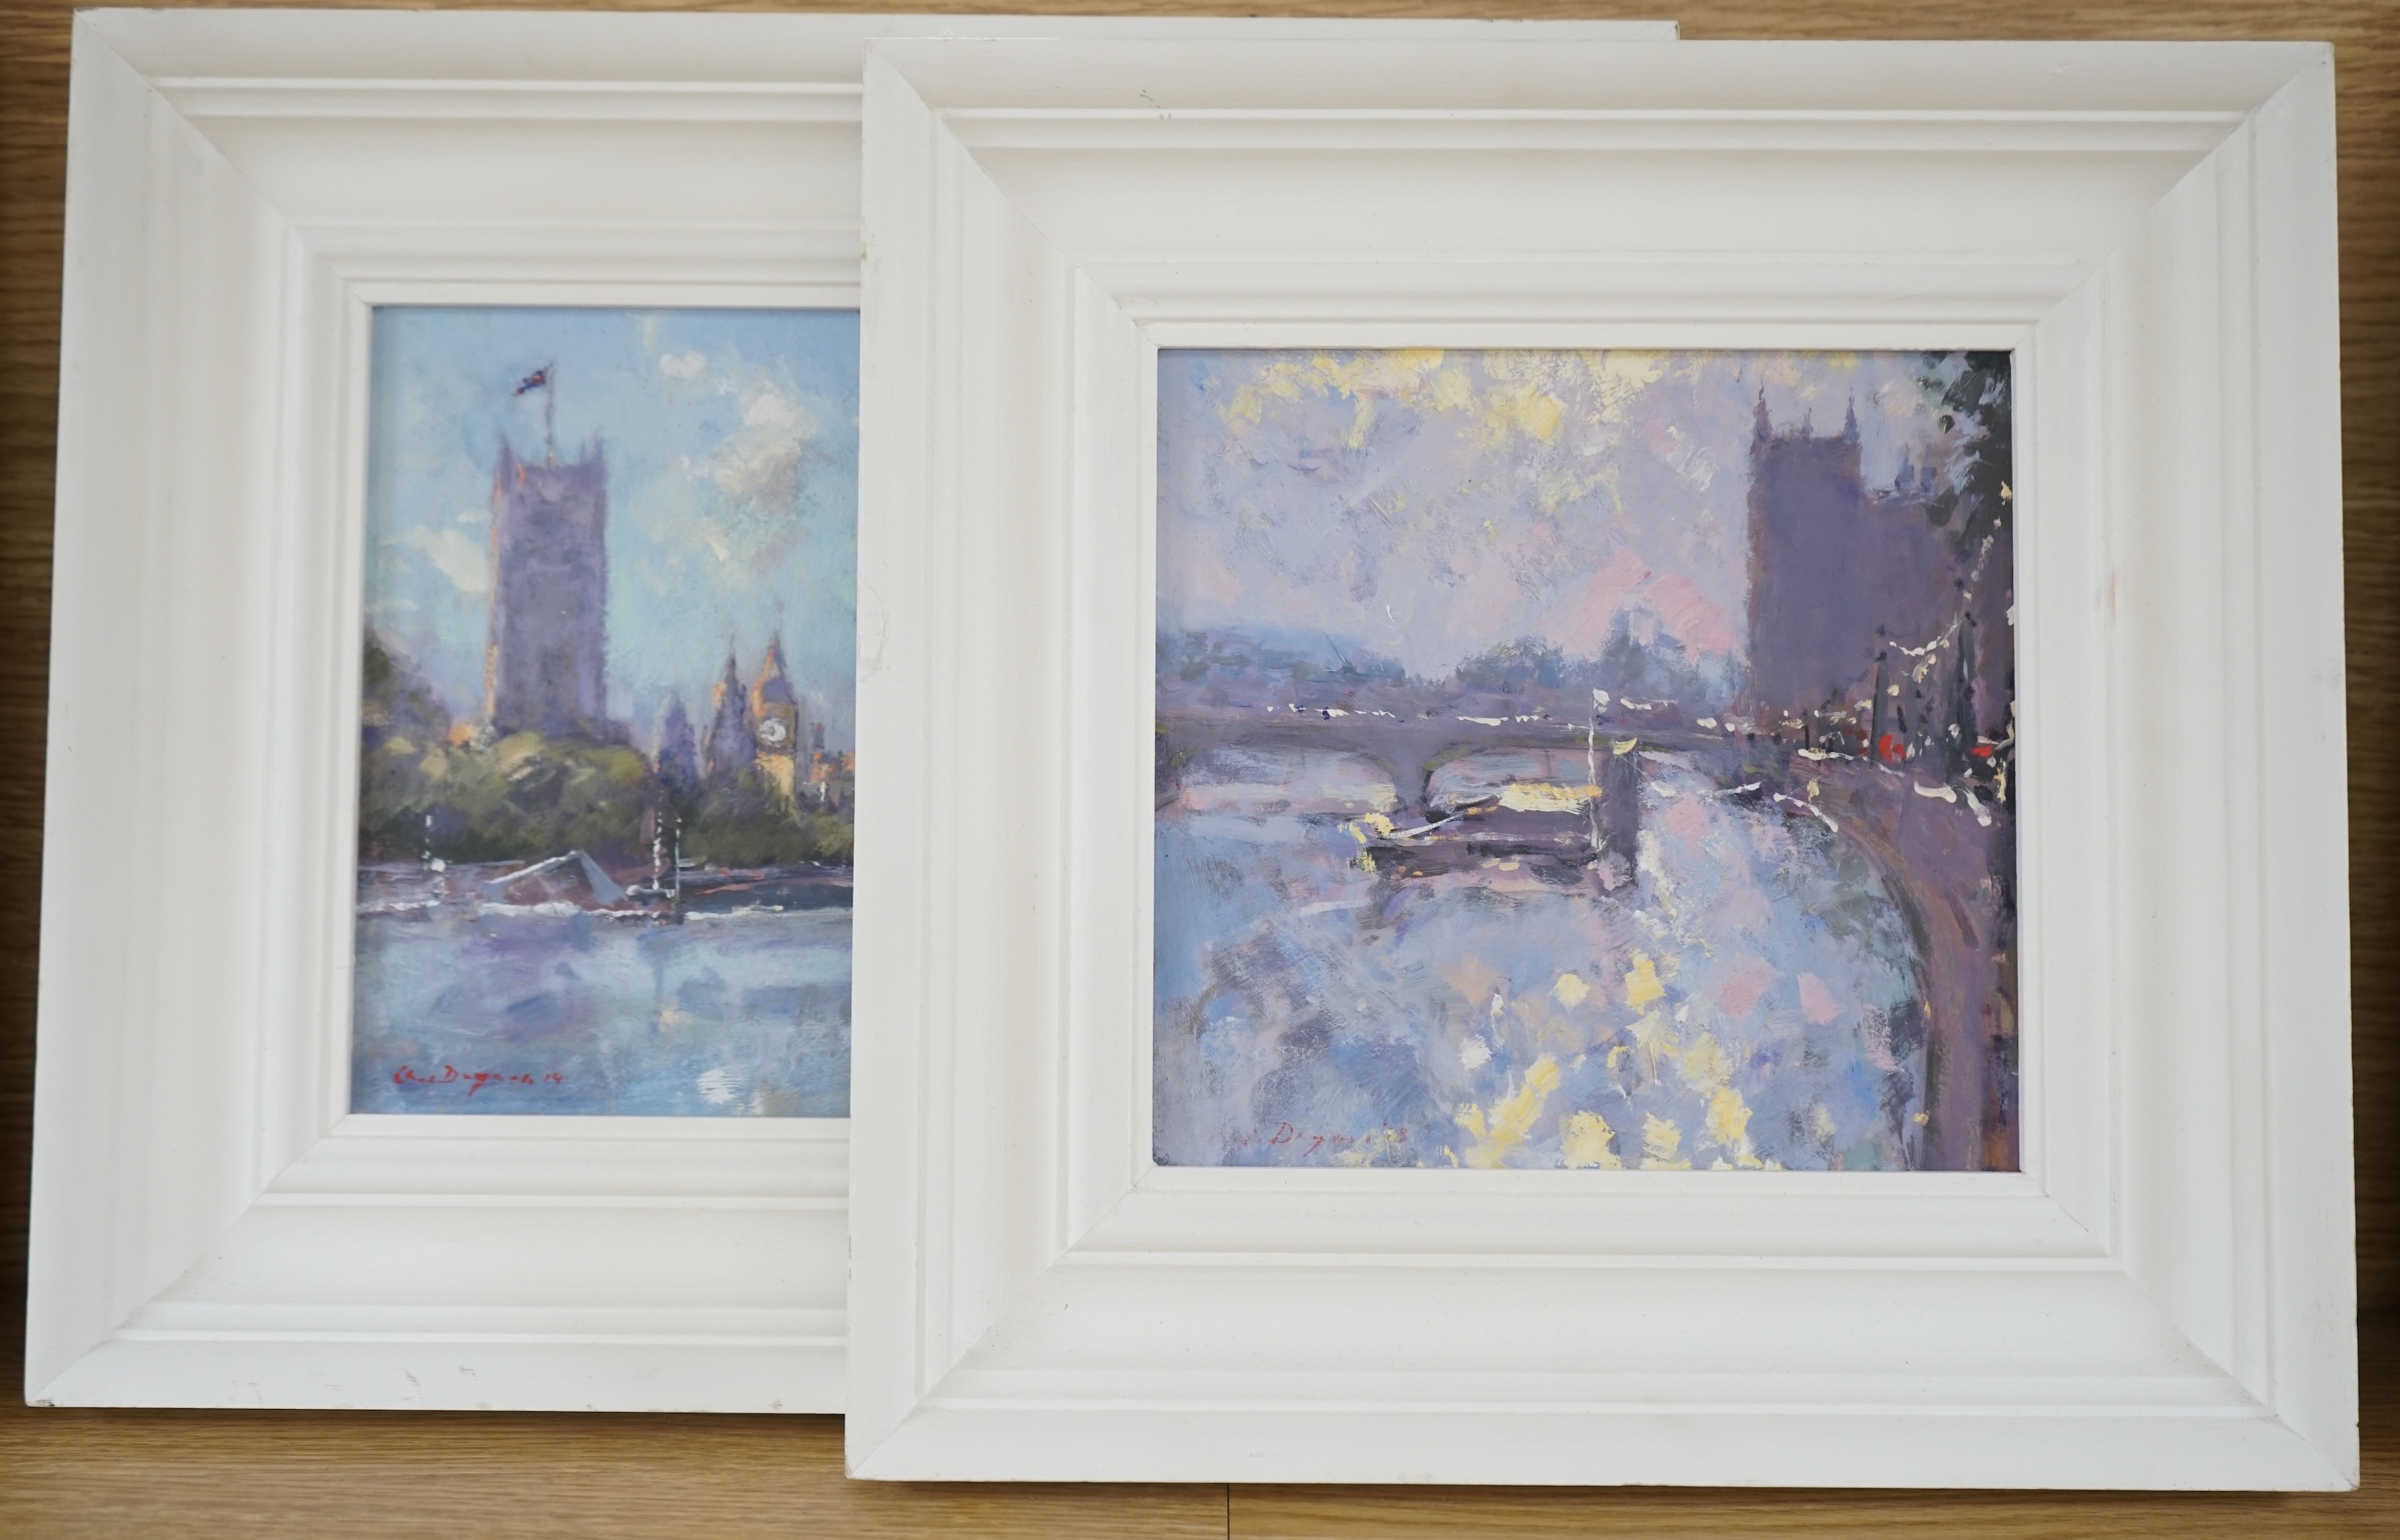 Chris Daynes (b.1946), two Impressionist oils on board, Thames London views, each signed and dated ‘13 & ‘14, 18.5 x 24cm. Condition - good